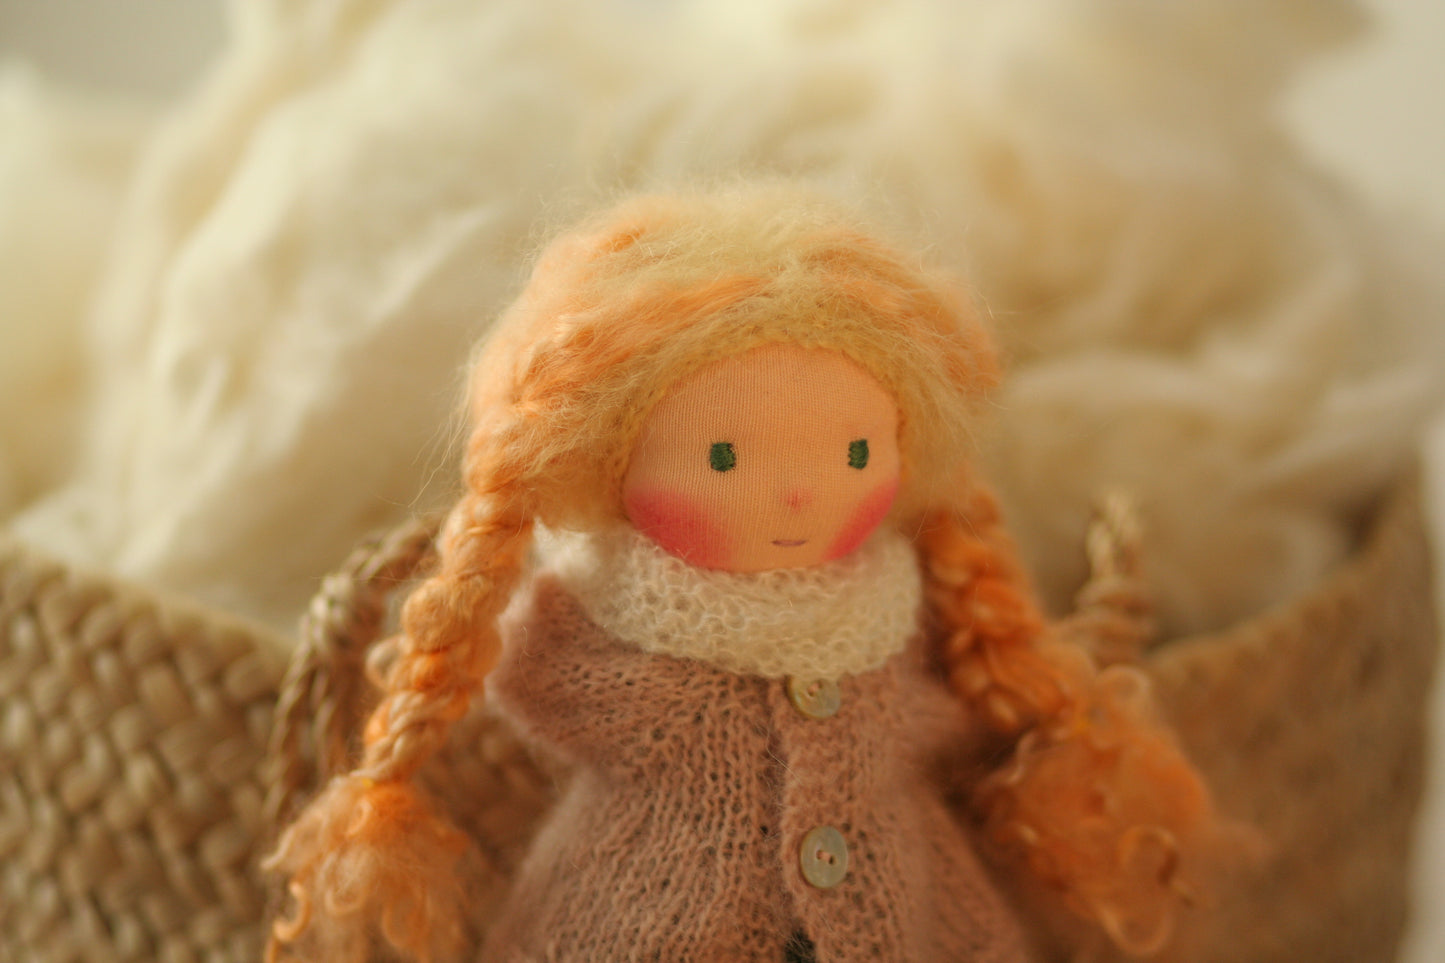 Justine  -  Peperuda knitted doll, Waldorf doll, art doll, soft doll, handmade doll, puppen